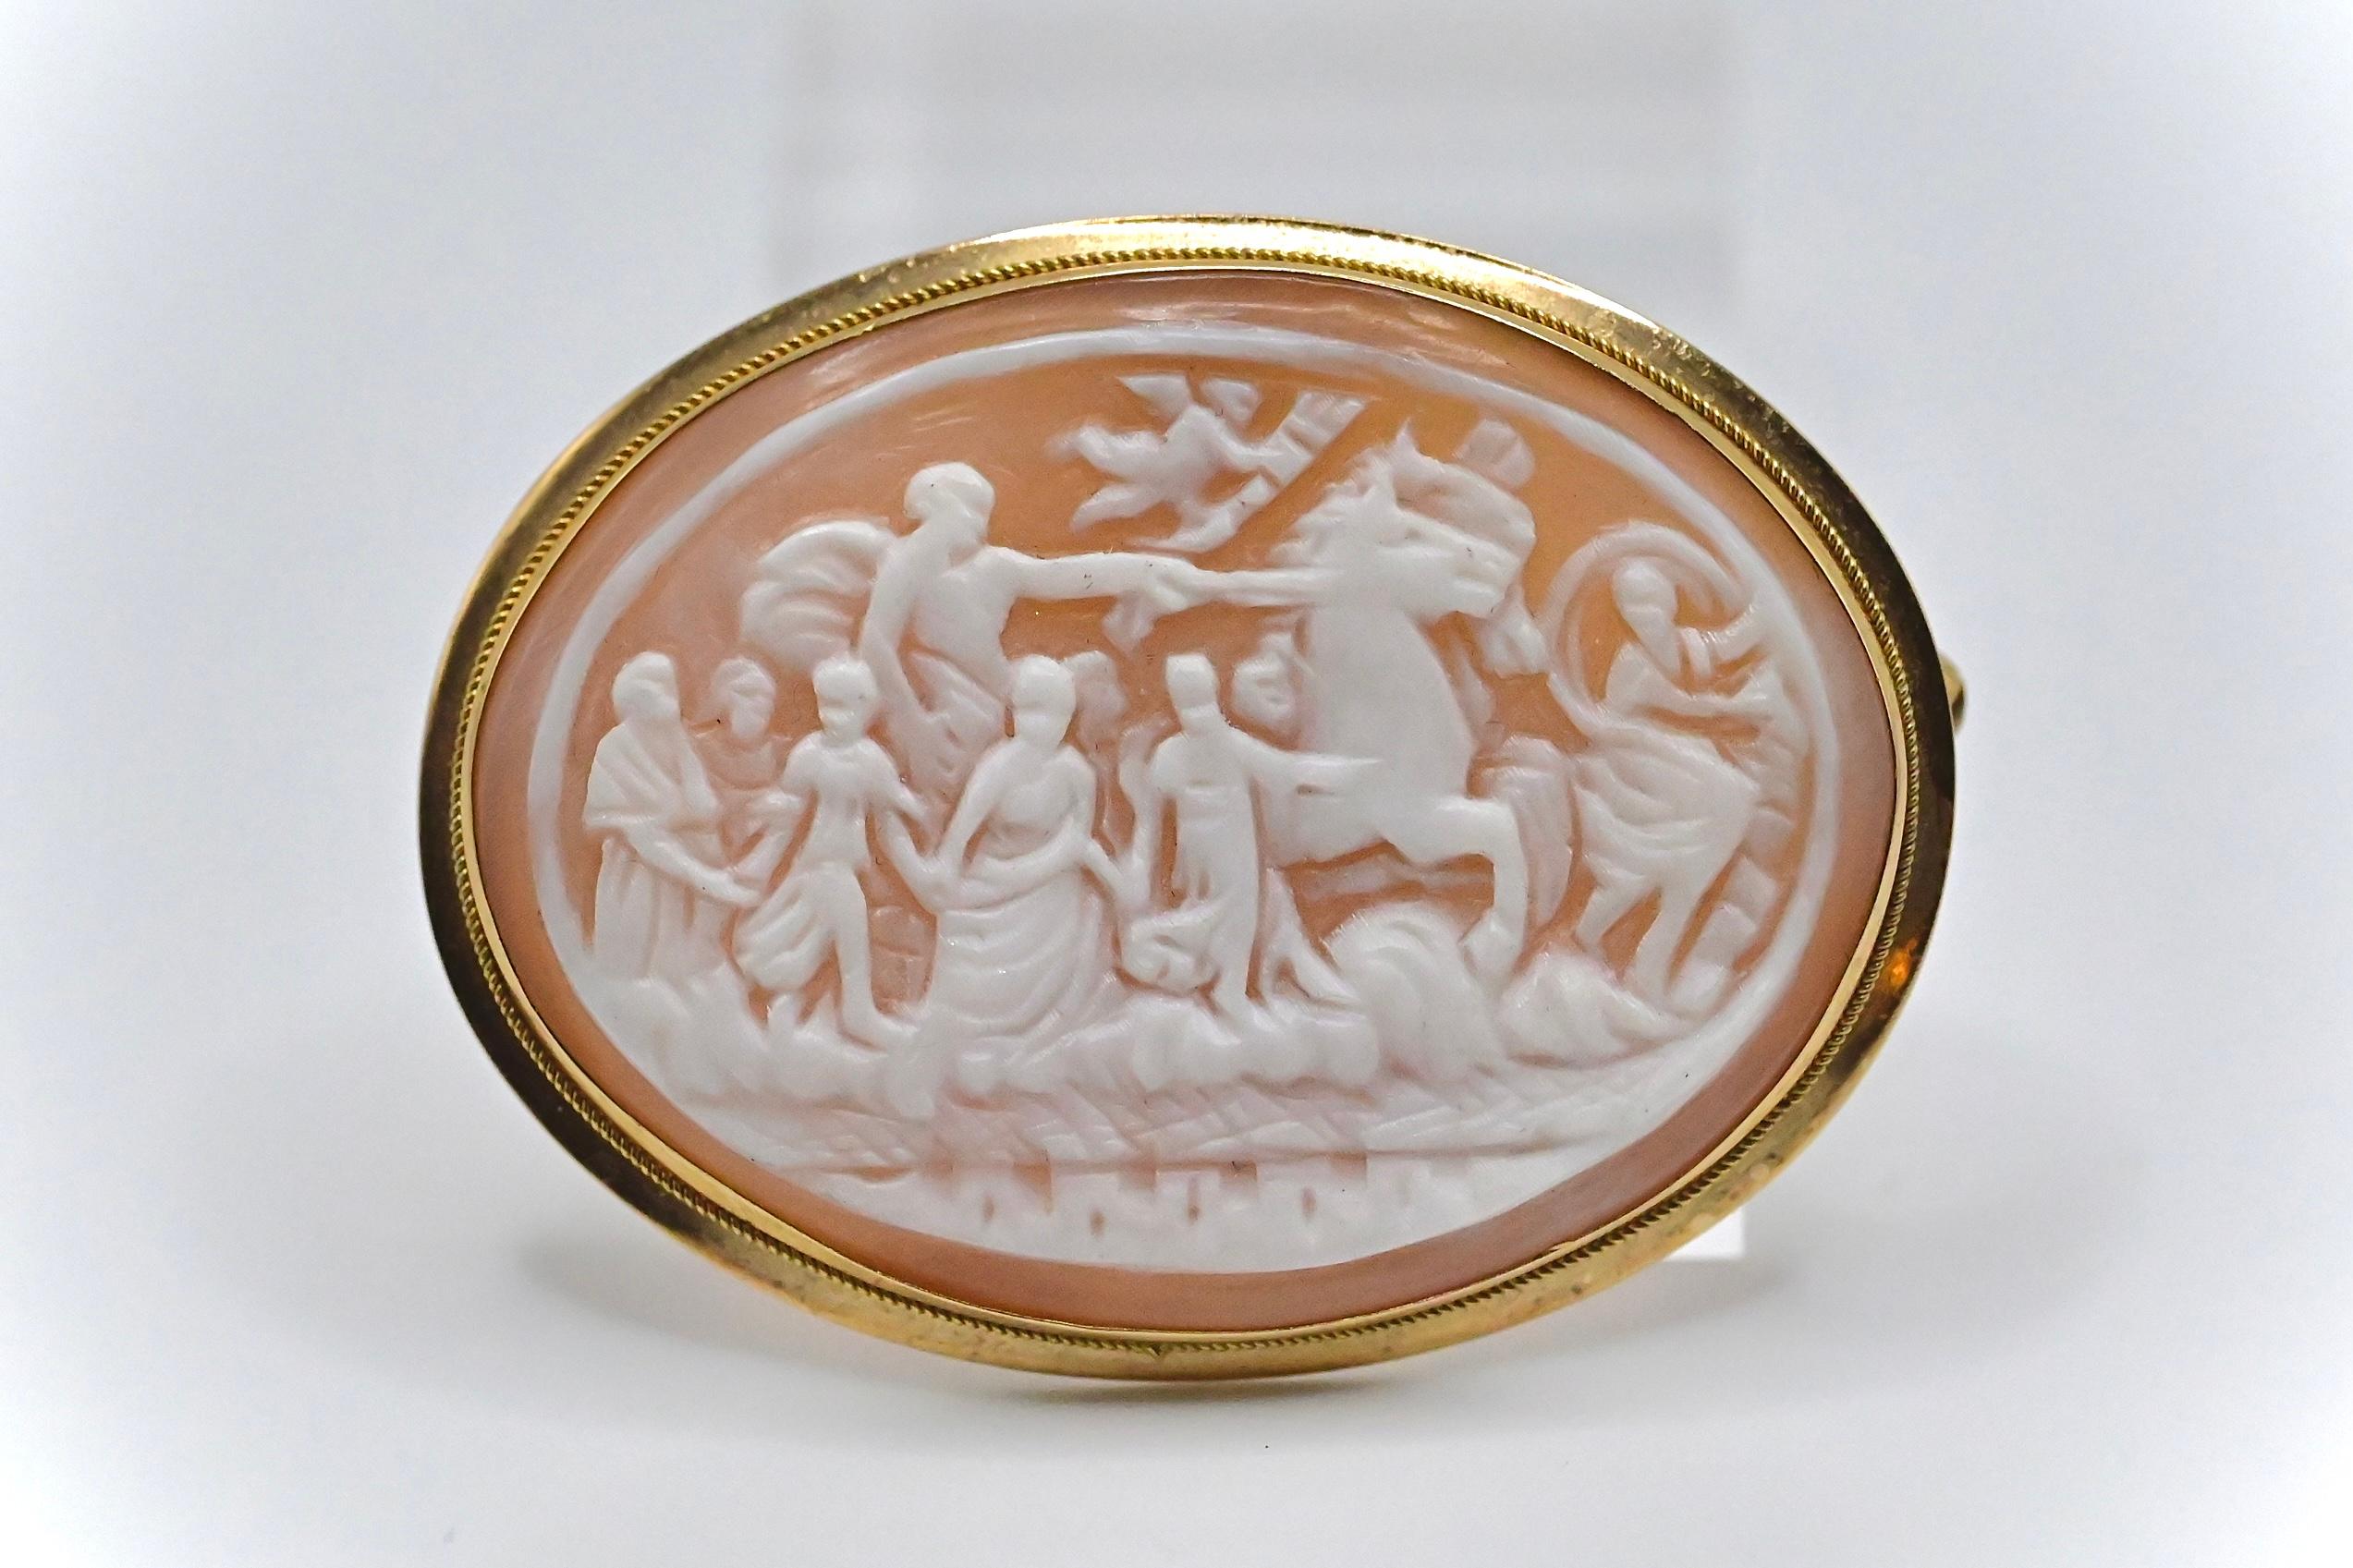 This is an exquisite 18k gold carved shell cameo brooch that tells a story on its design. It weighs 8 grams, stands at 1 2/8 inches, and has a 1 11/16 inch diameter. It’s in good condition with little wear, and If you have any questions or concerns